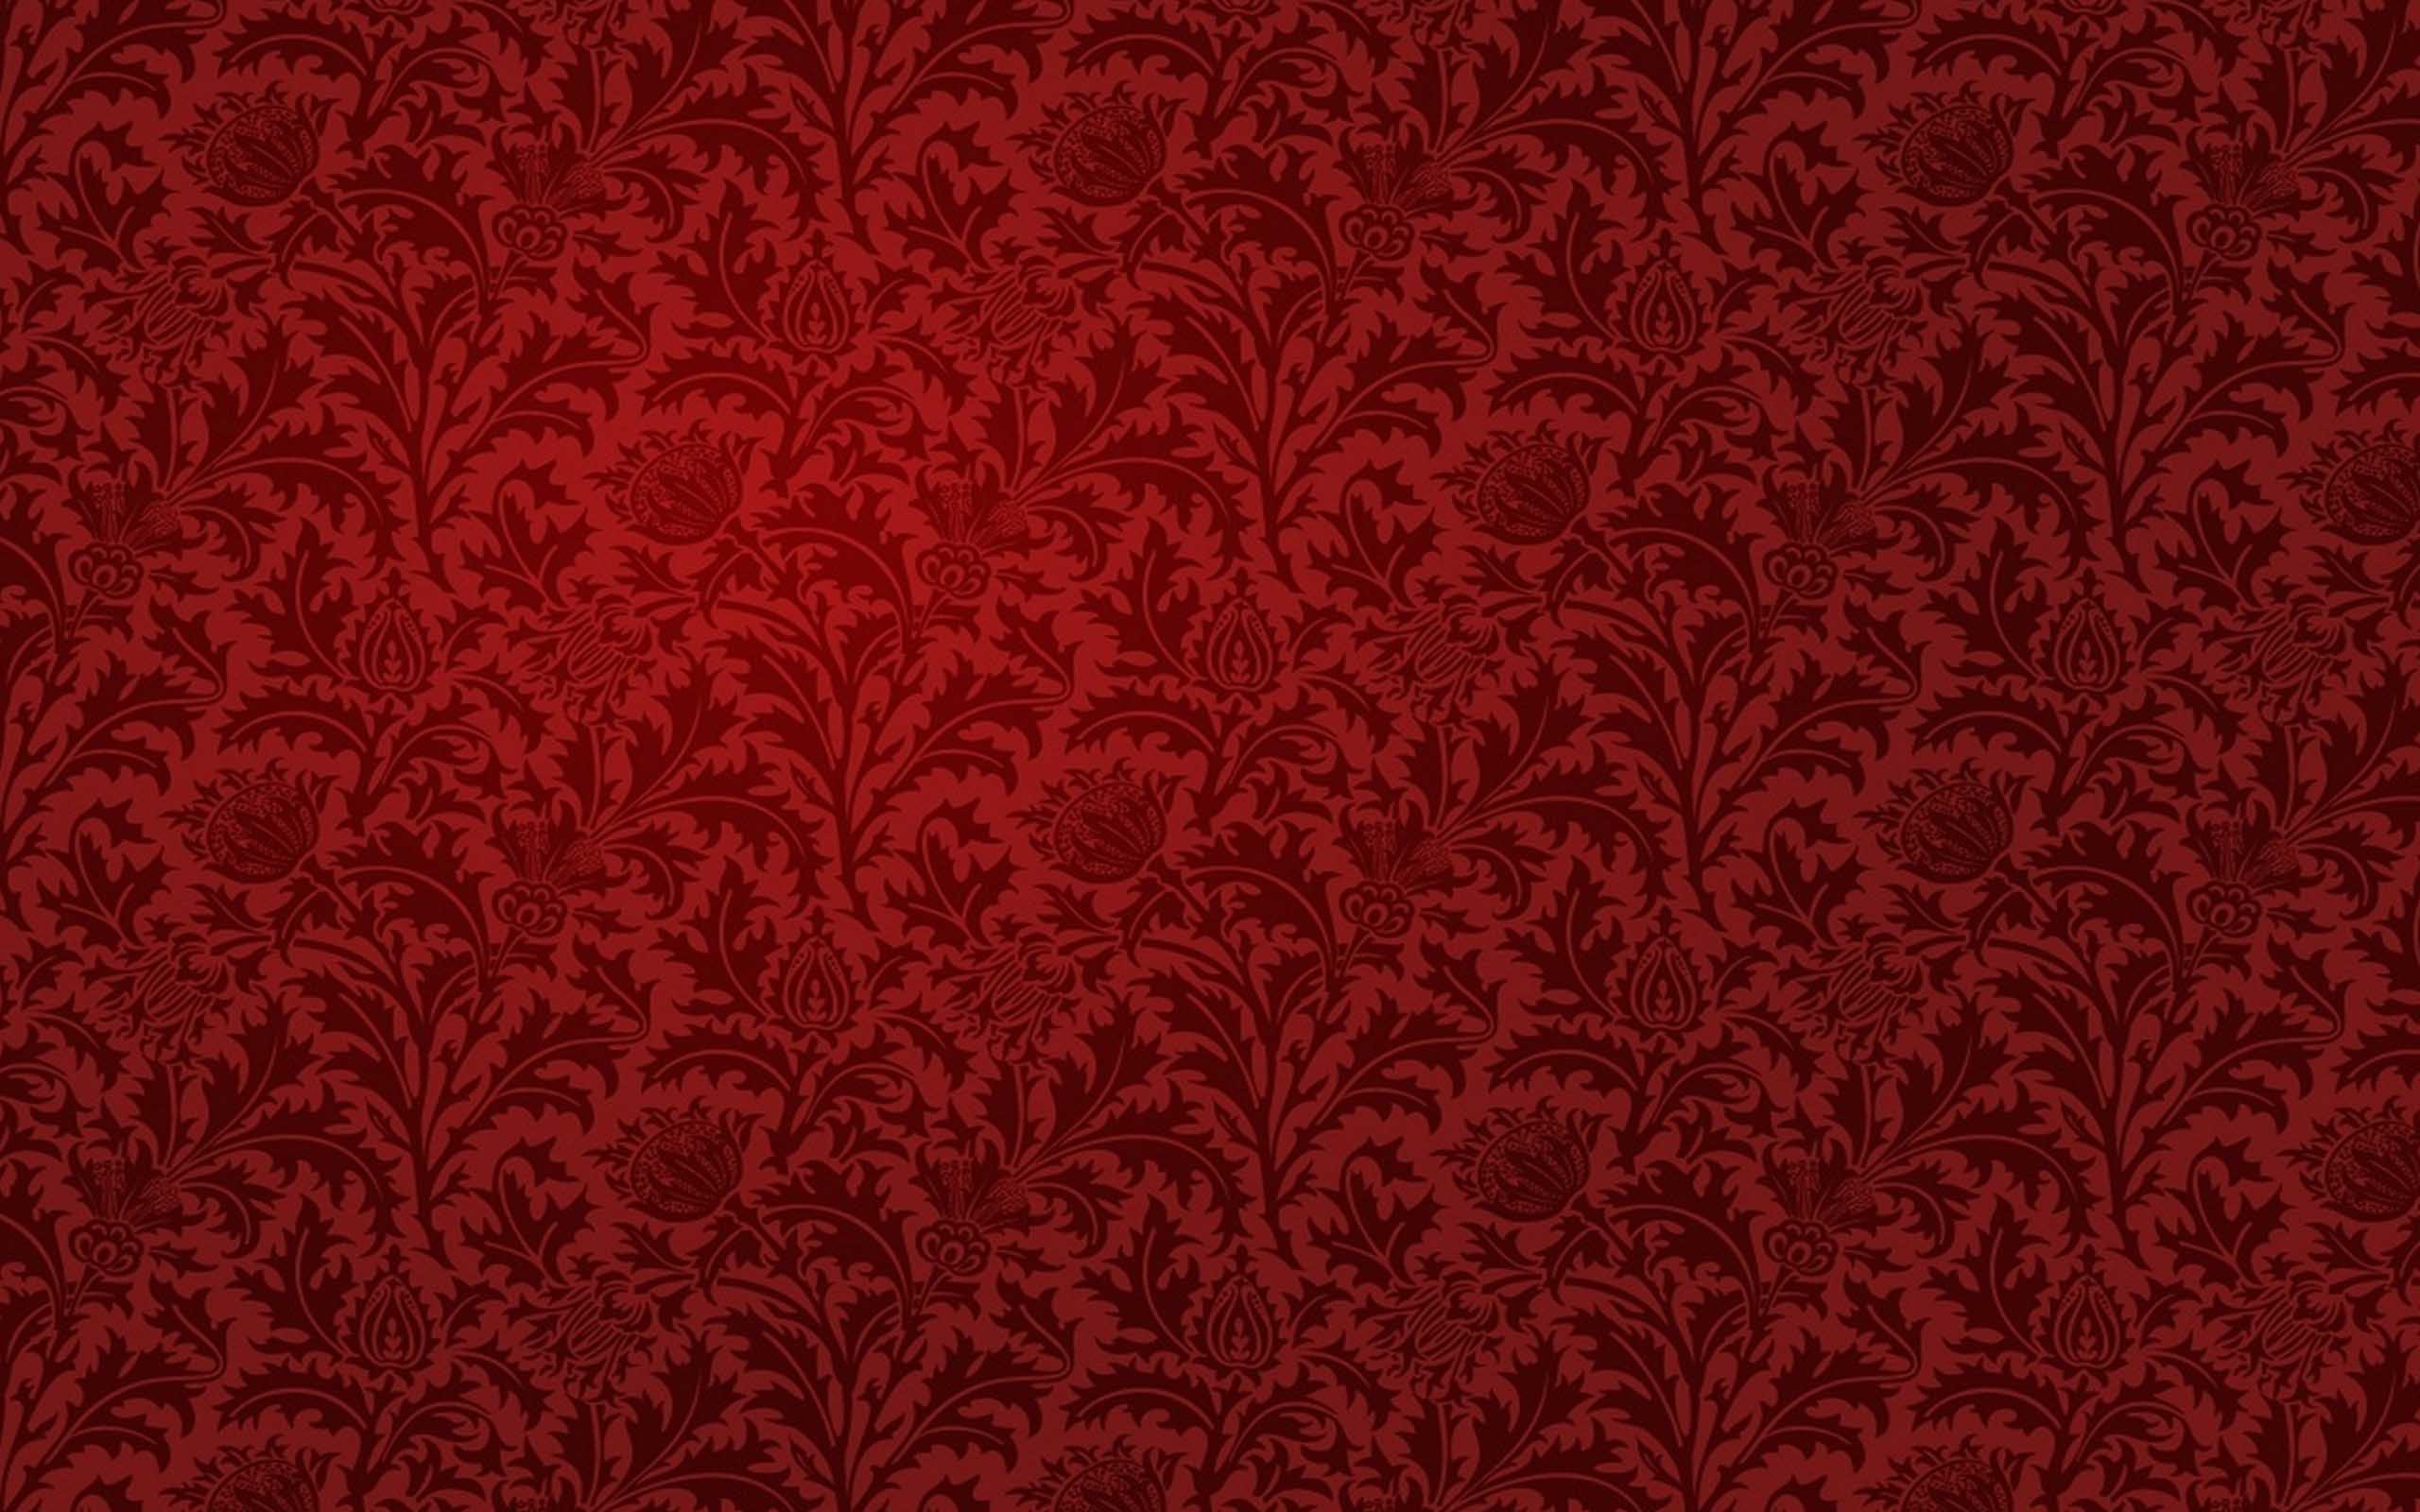 Download wallpaper 1920x1080 relief red texture triangle full hd hdtv  fhd 1080p hd background